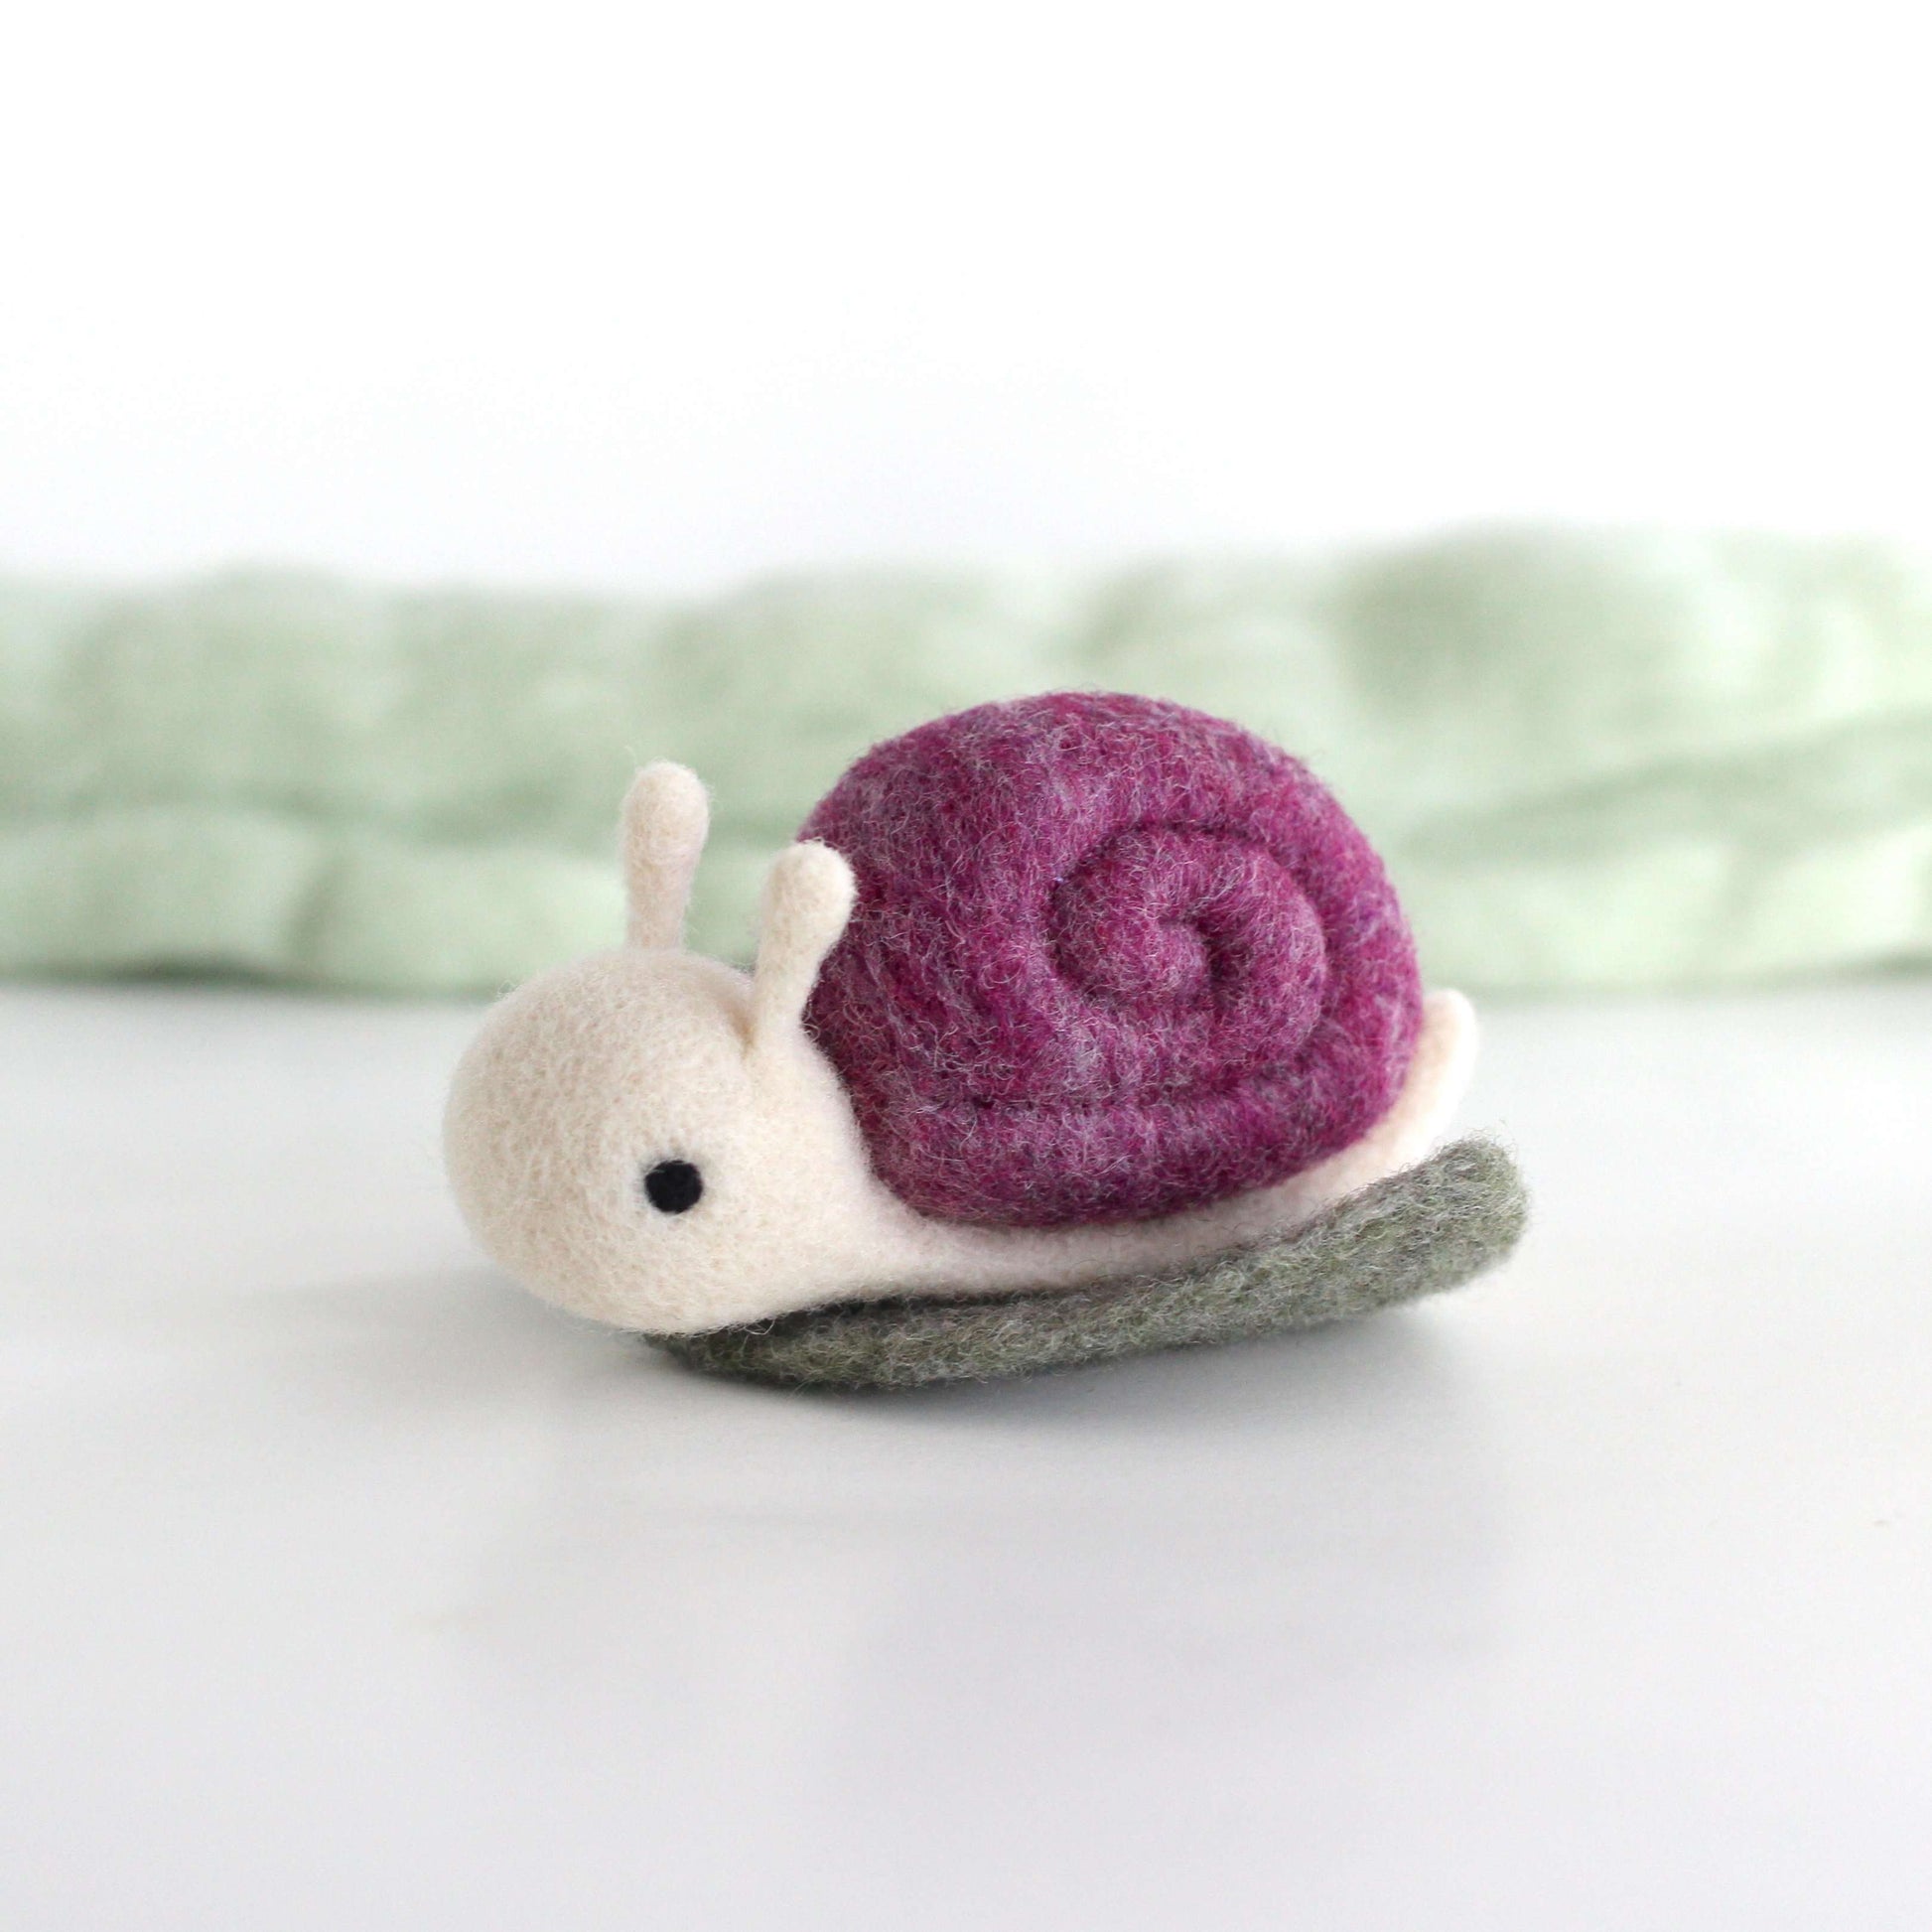 Needle Felted Snail on a Leaf (Purple) by Wild Whimsy Woolies